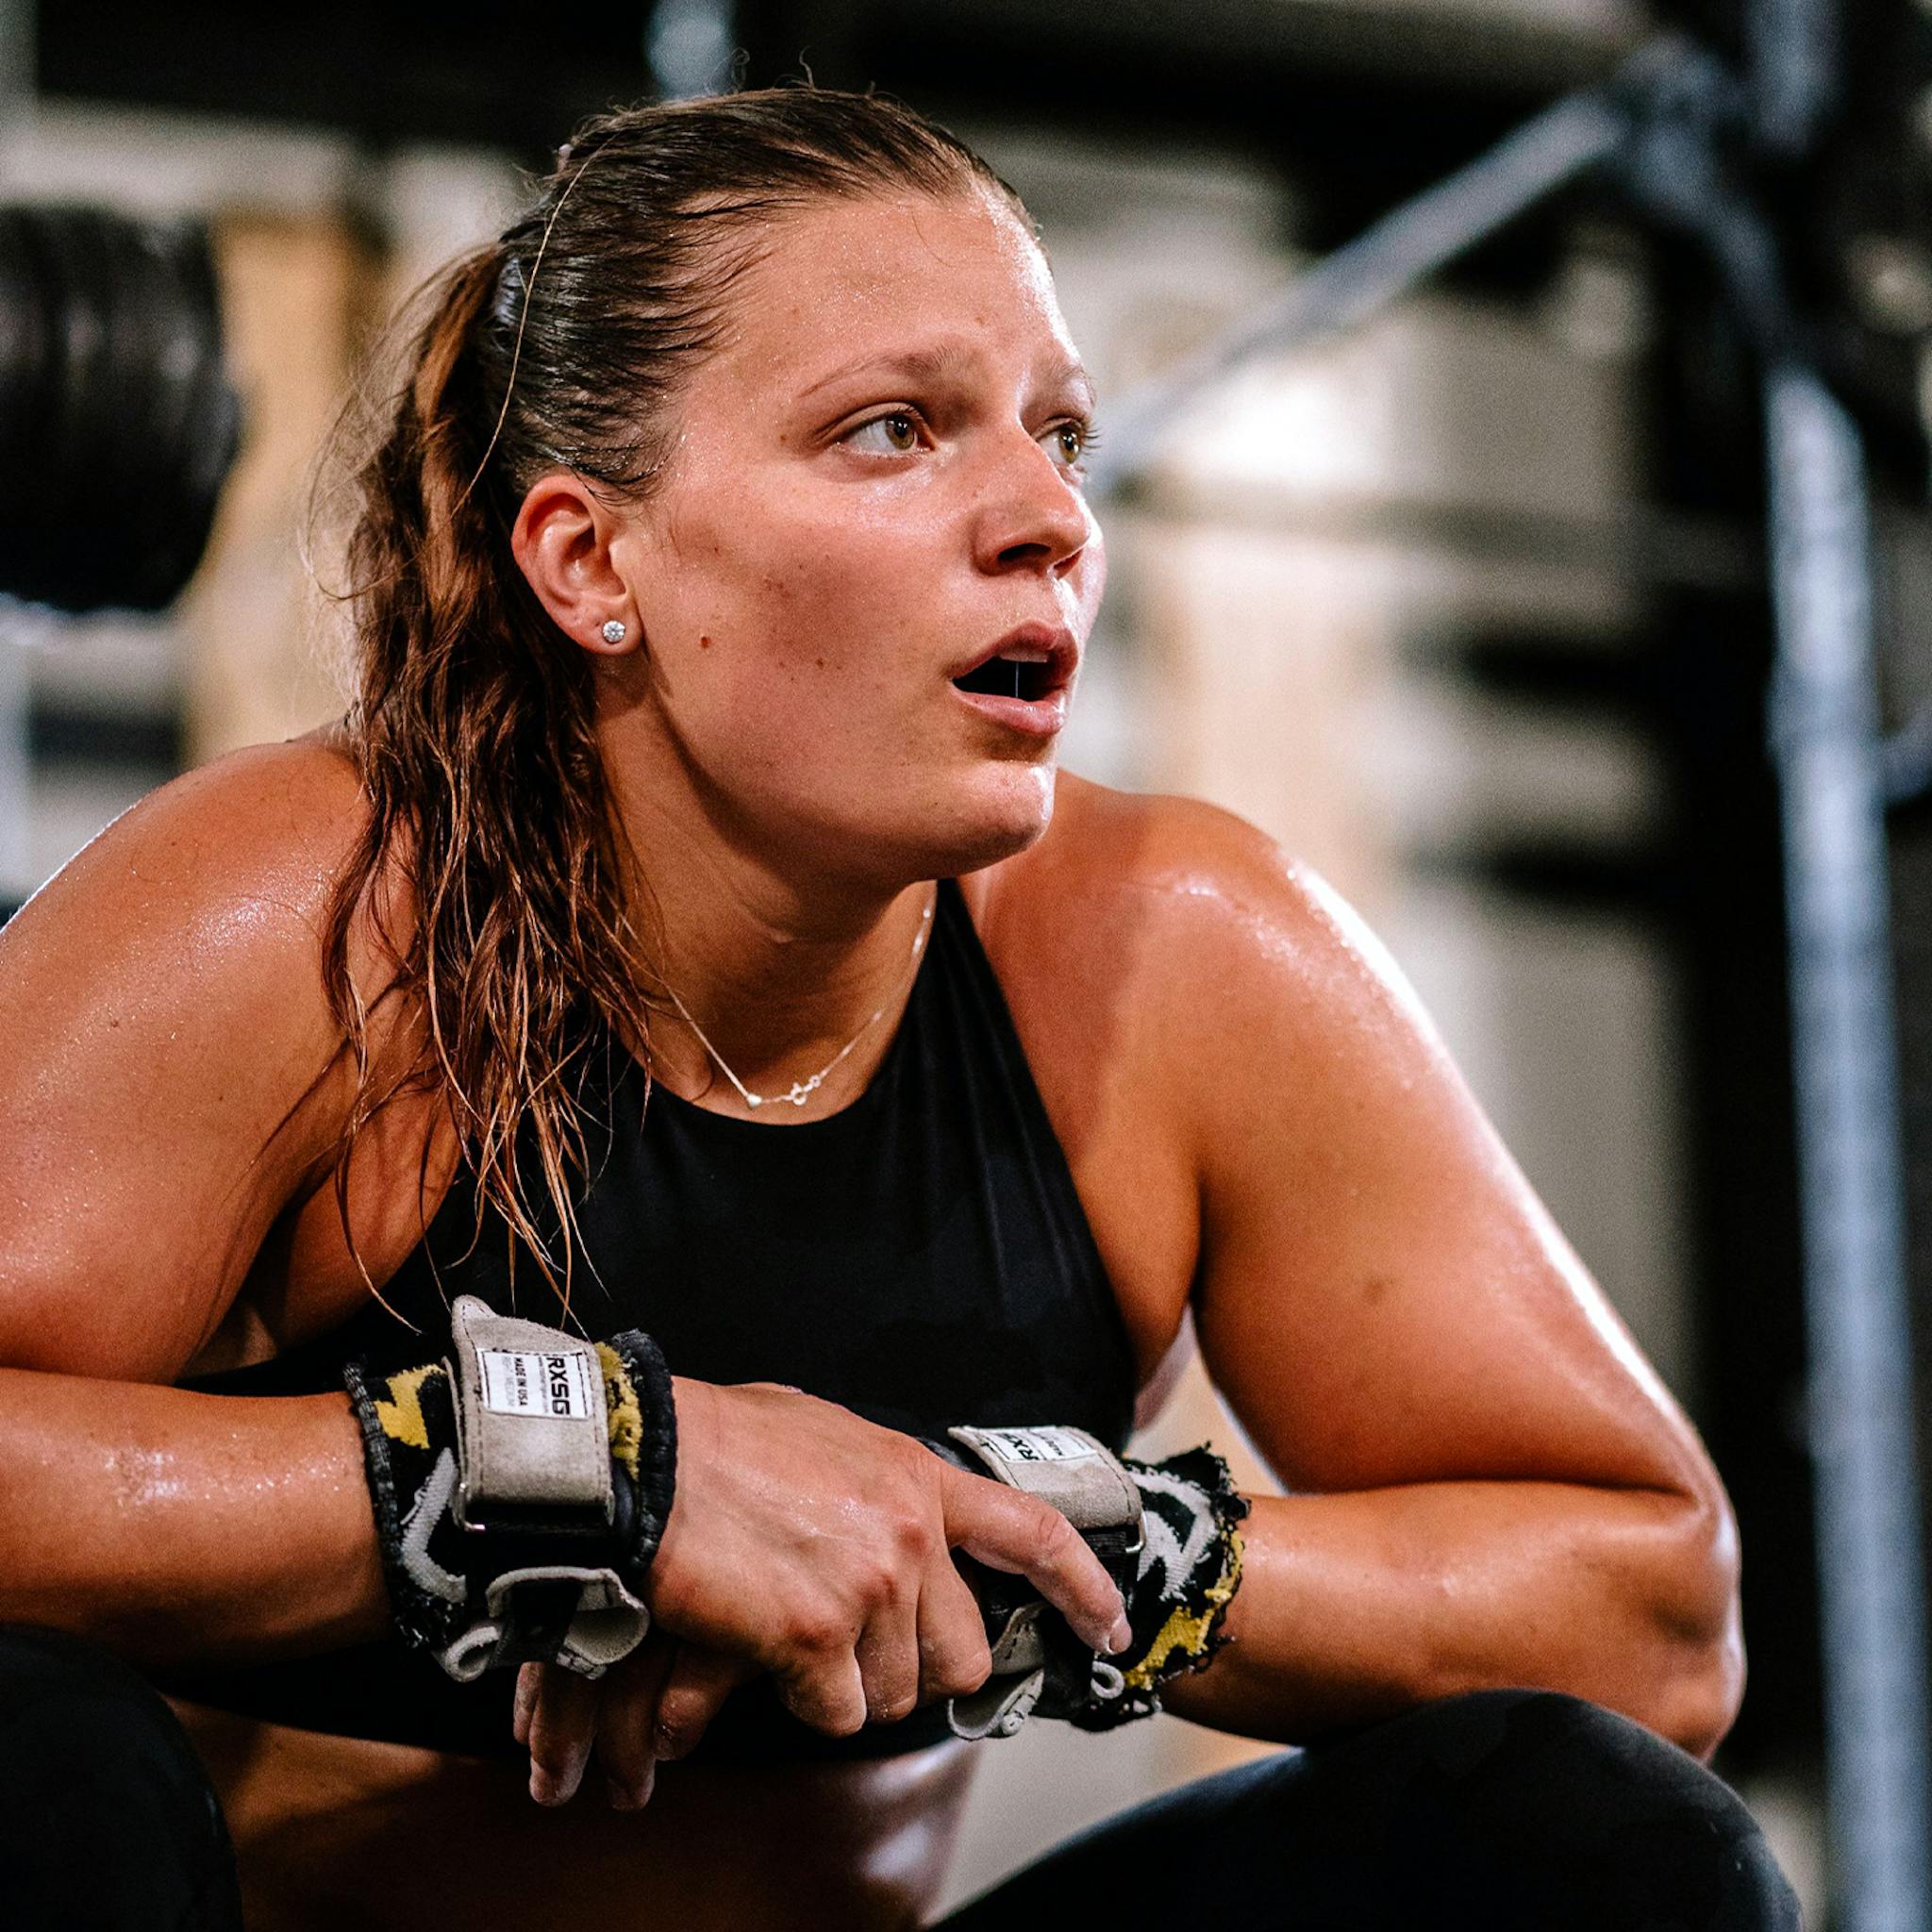 Laura Horváth, 2nd Fittest Woman in the World / Crossfit® Games Athlete